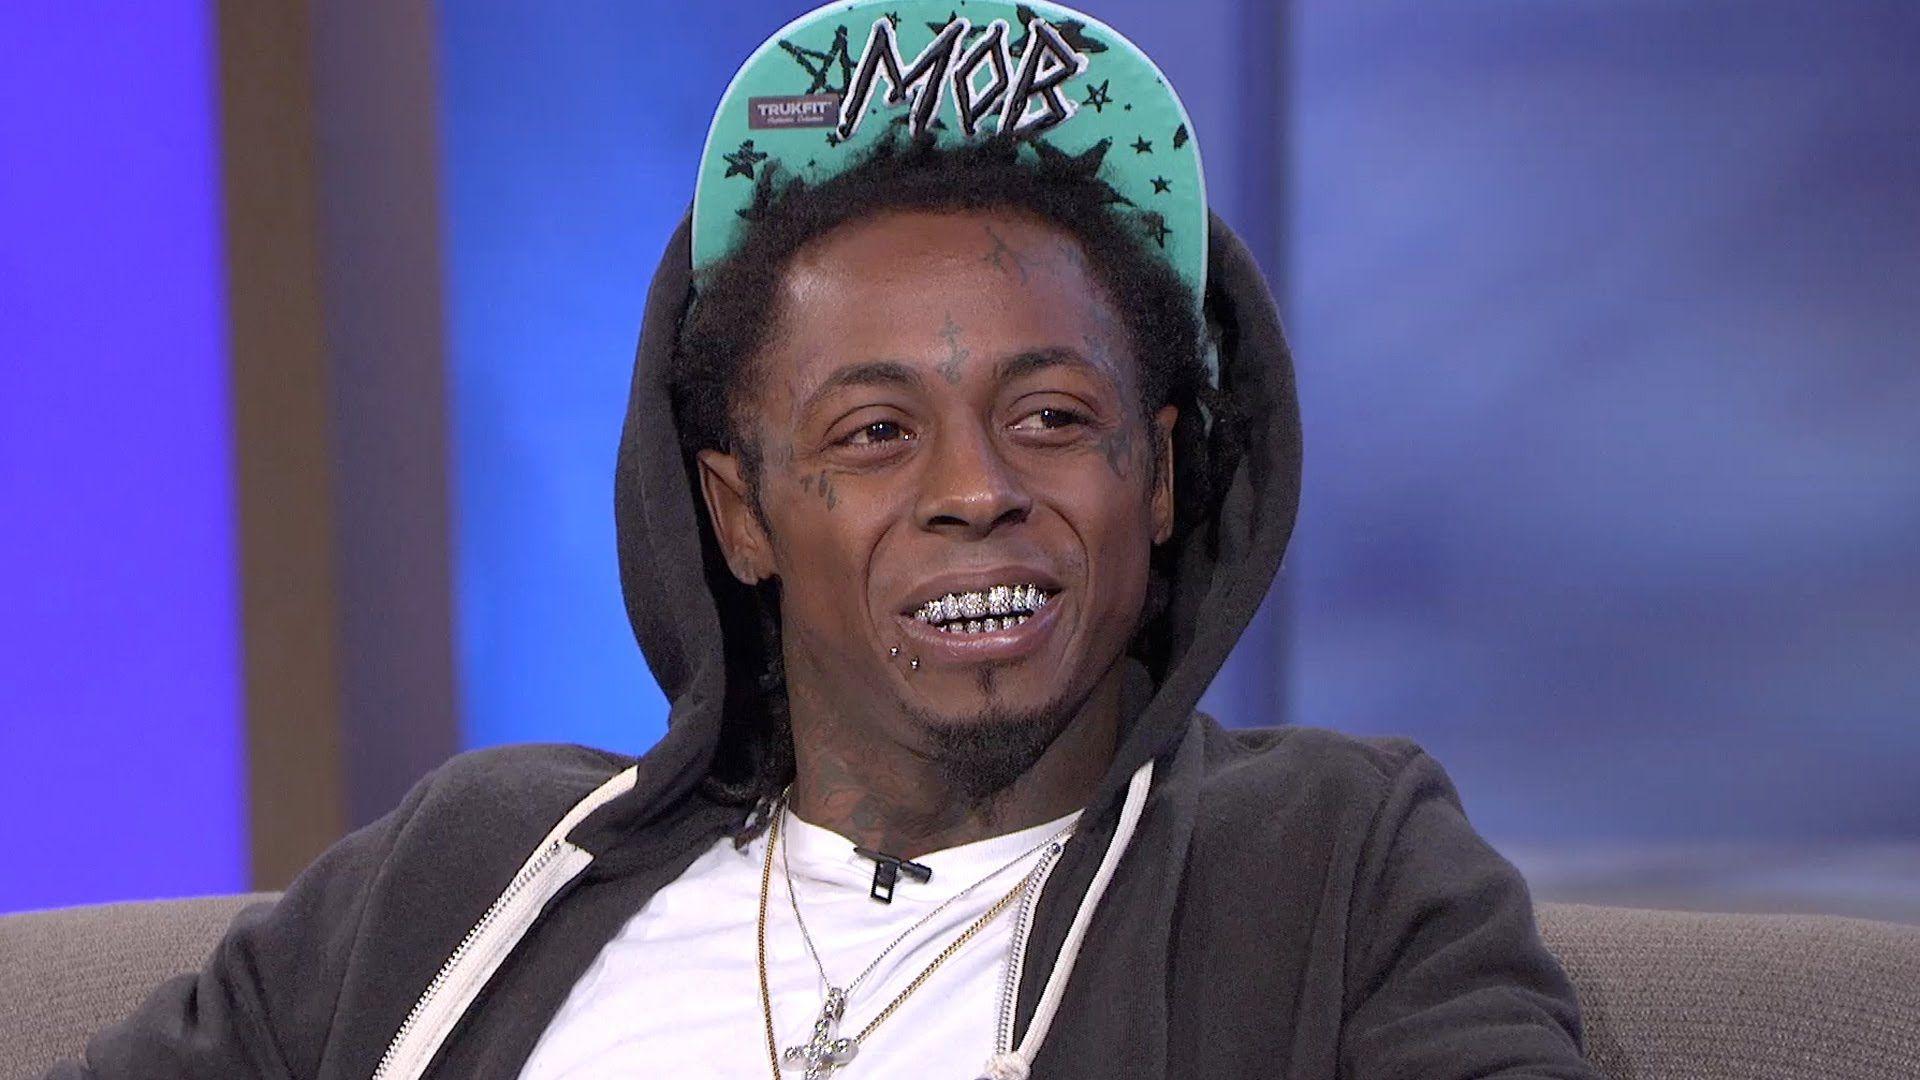 Lil Wayne Talks With Jim Rome On Showtime (Video). Home of Hip